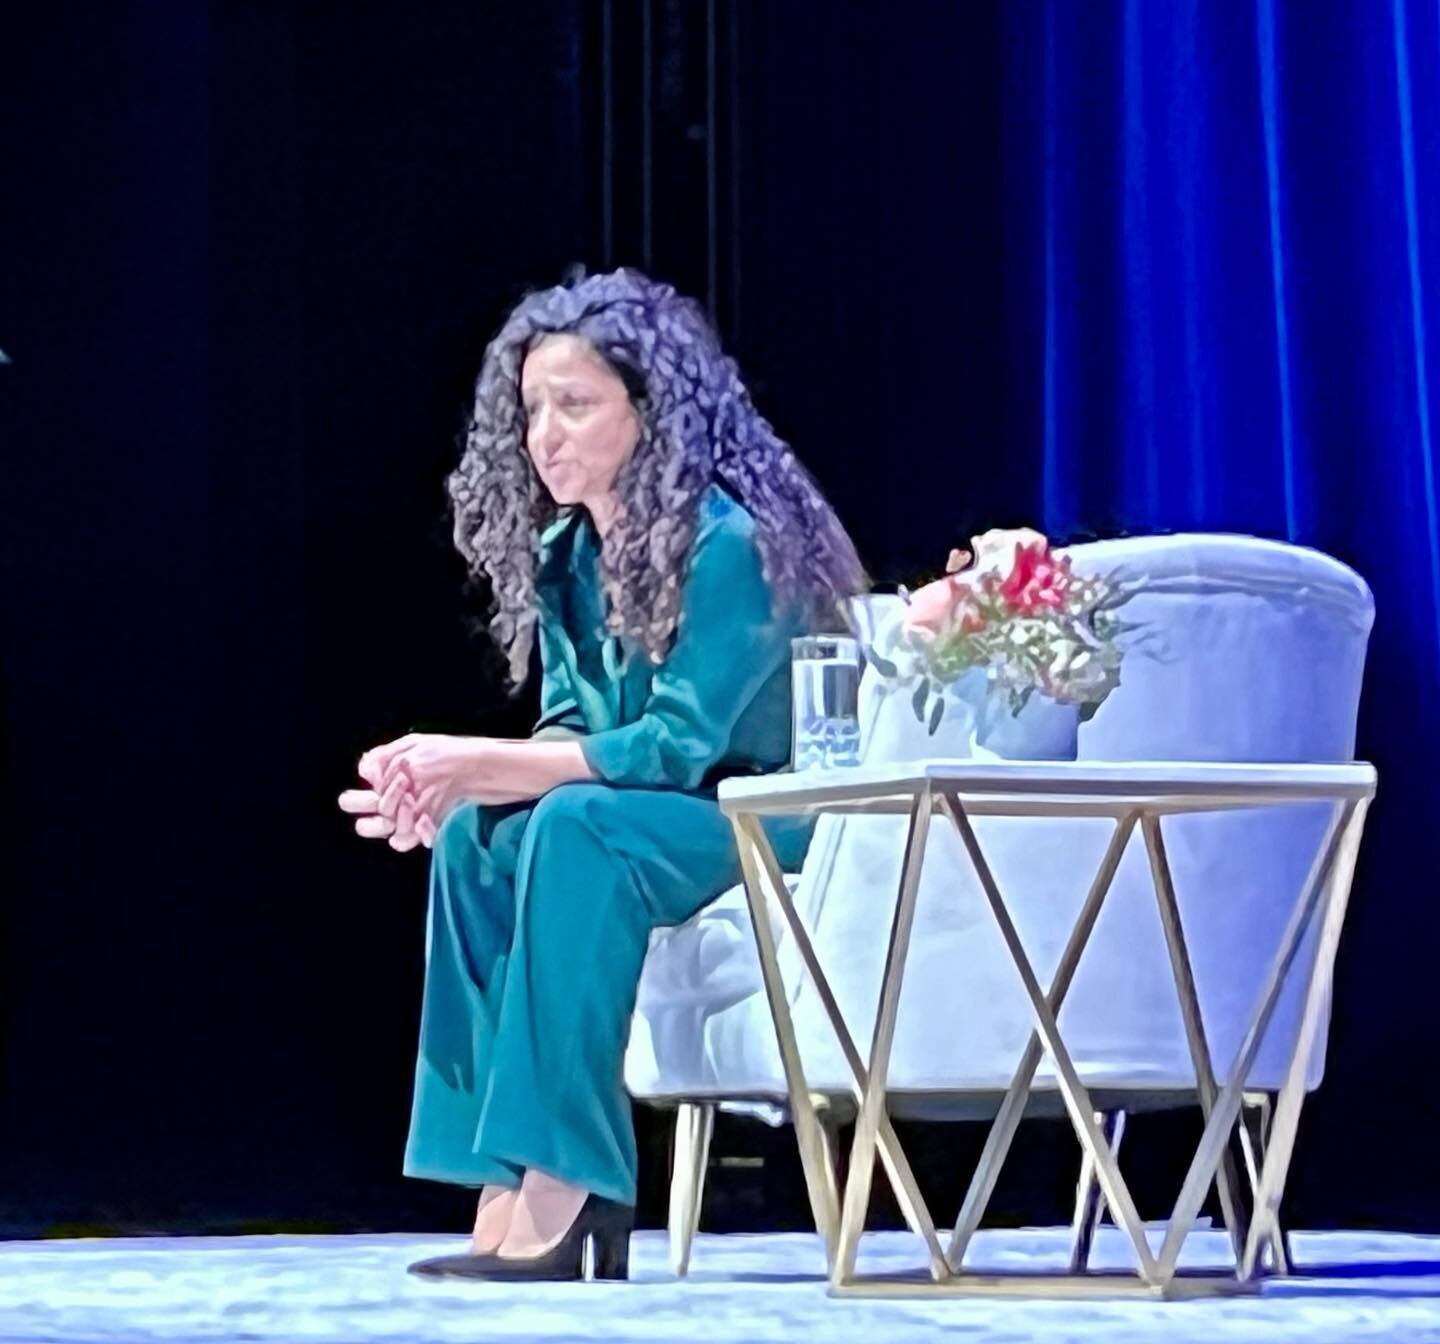 It all starts with this: Listen to children with an open heart. Pono&rsquo;s founder, Maysaa Bazna, gave a moving presentation today on creating sanctuary in education at the &ldquo;Mindfulness in a World on Fire&rdquo; conference. @wisdom2events @ci